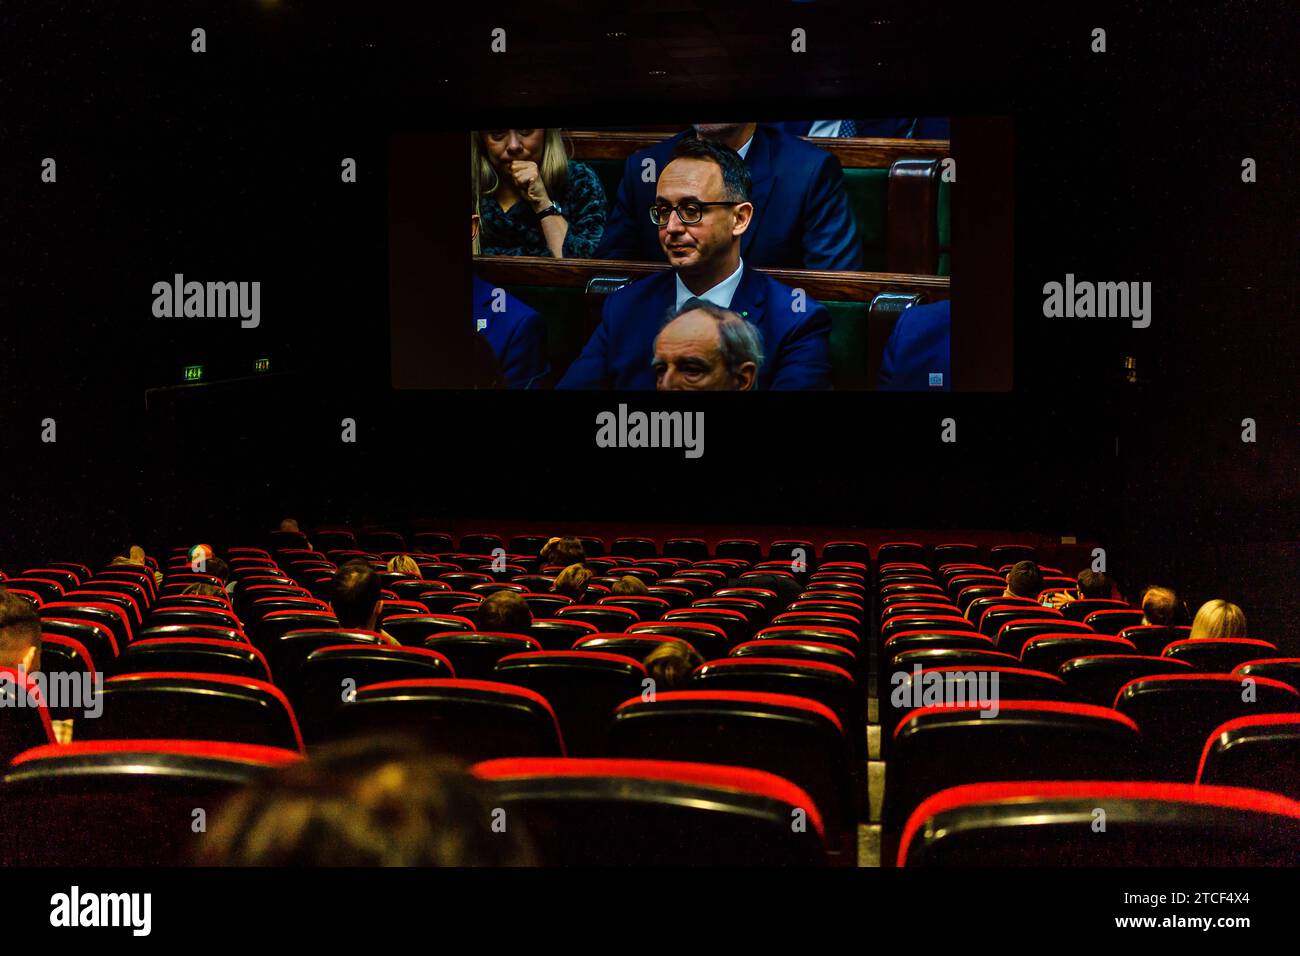 A cinema audience watches a live broadcast of the Polish Parliament proceedings, on the screen: Dariusz Klimczak PSL-TD receives a nomination for the office of Minister of Infrastructure Broadcast of the Sejm of the Republic of Poland in the Kinoteka cinema in Warsaw. After the victory of the Civic Coalition, the Left, the Third Way, and the defeat of Law and Justice, the Sejm channel on YouTube already has an audience of several million. Prime Minister Donald Tusk s Expose was broadcast in the cinema. Warsaw Poland Copyright: xMikolajxJaneczekx Stock Photo